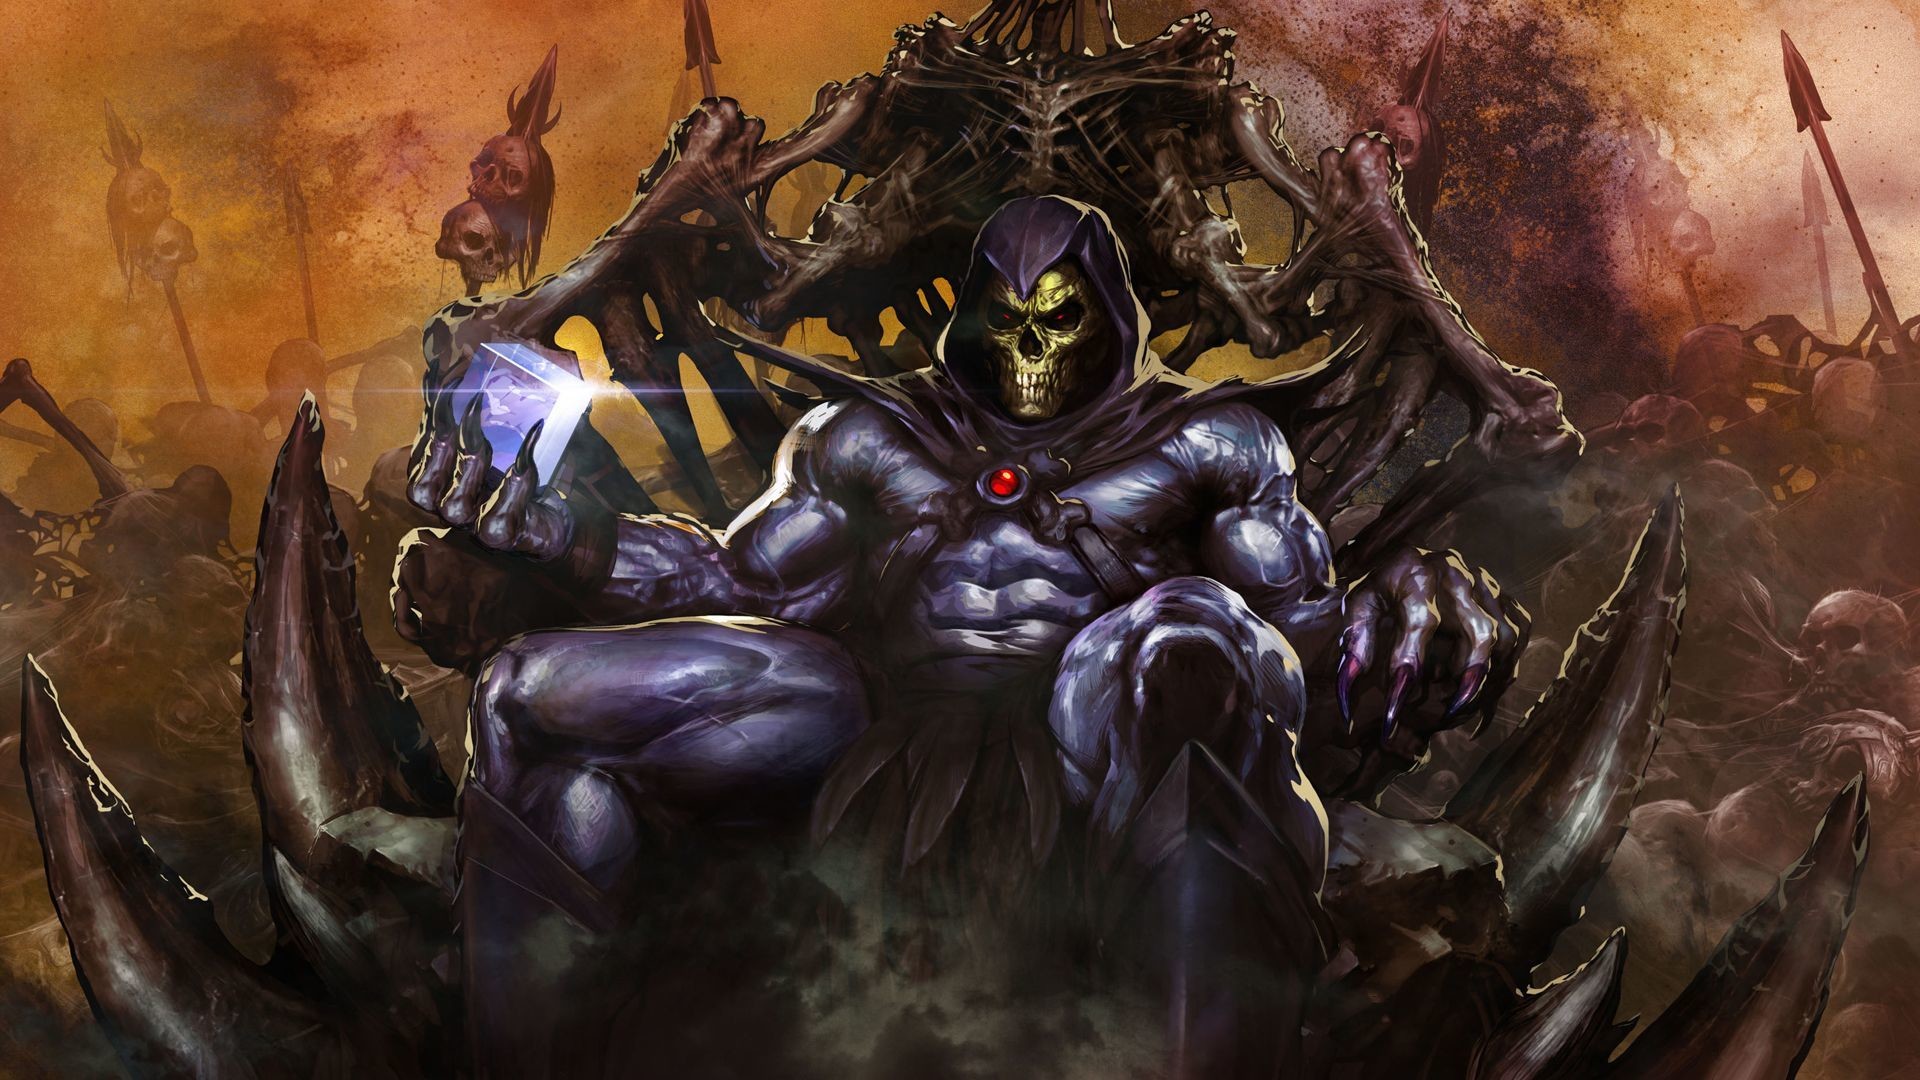 1920x1080 He-Man and the Masters of the Universe HD Wallpaper 